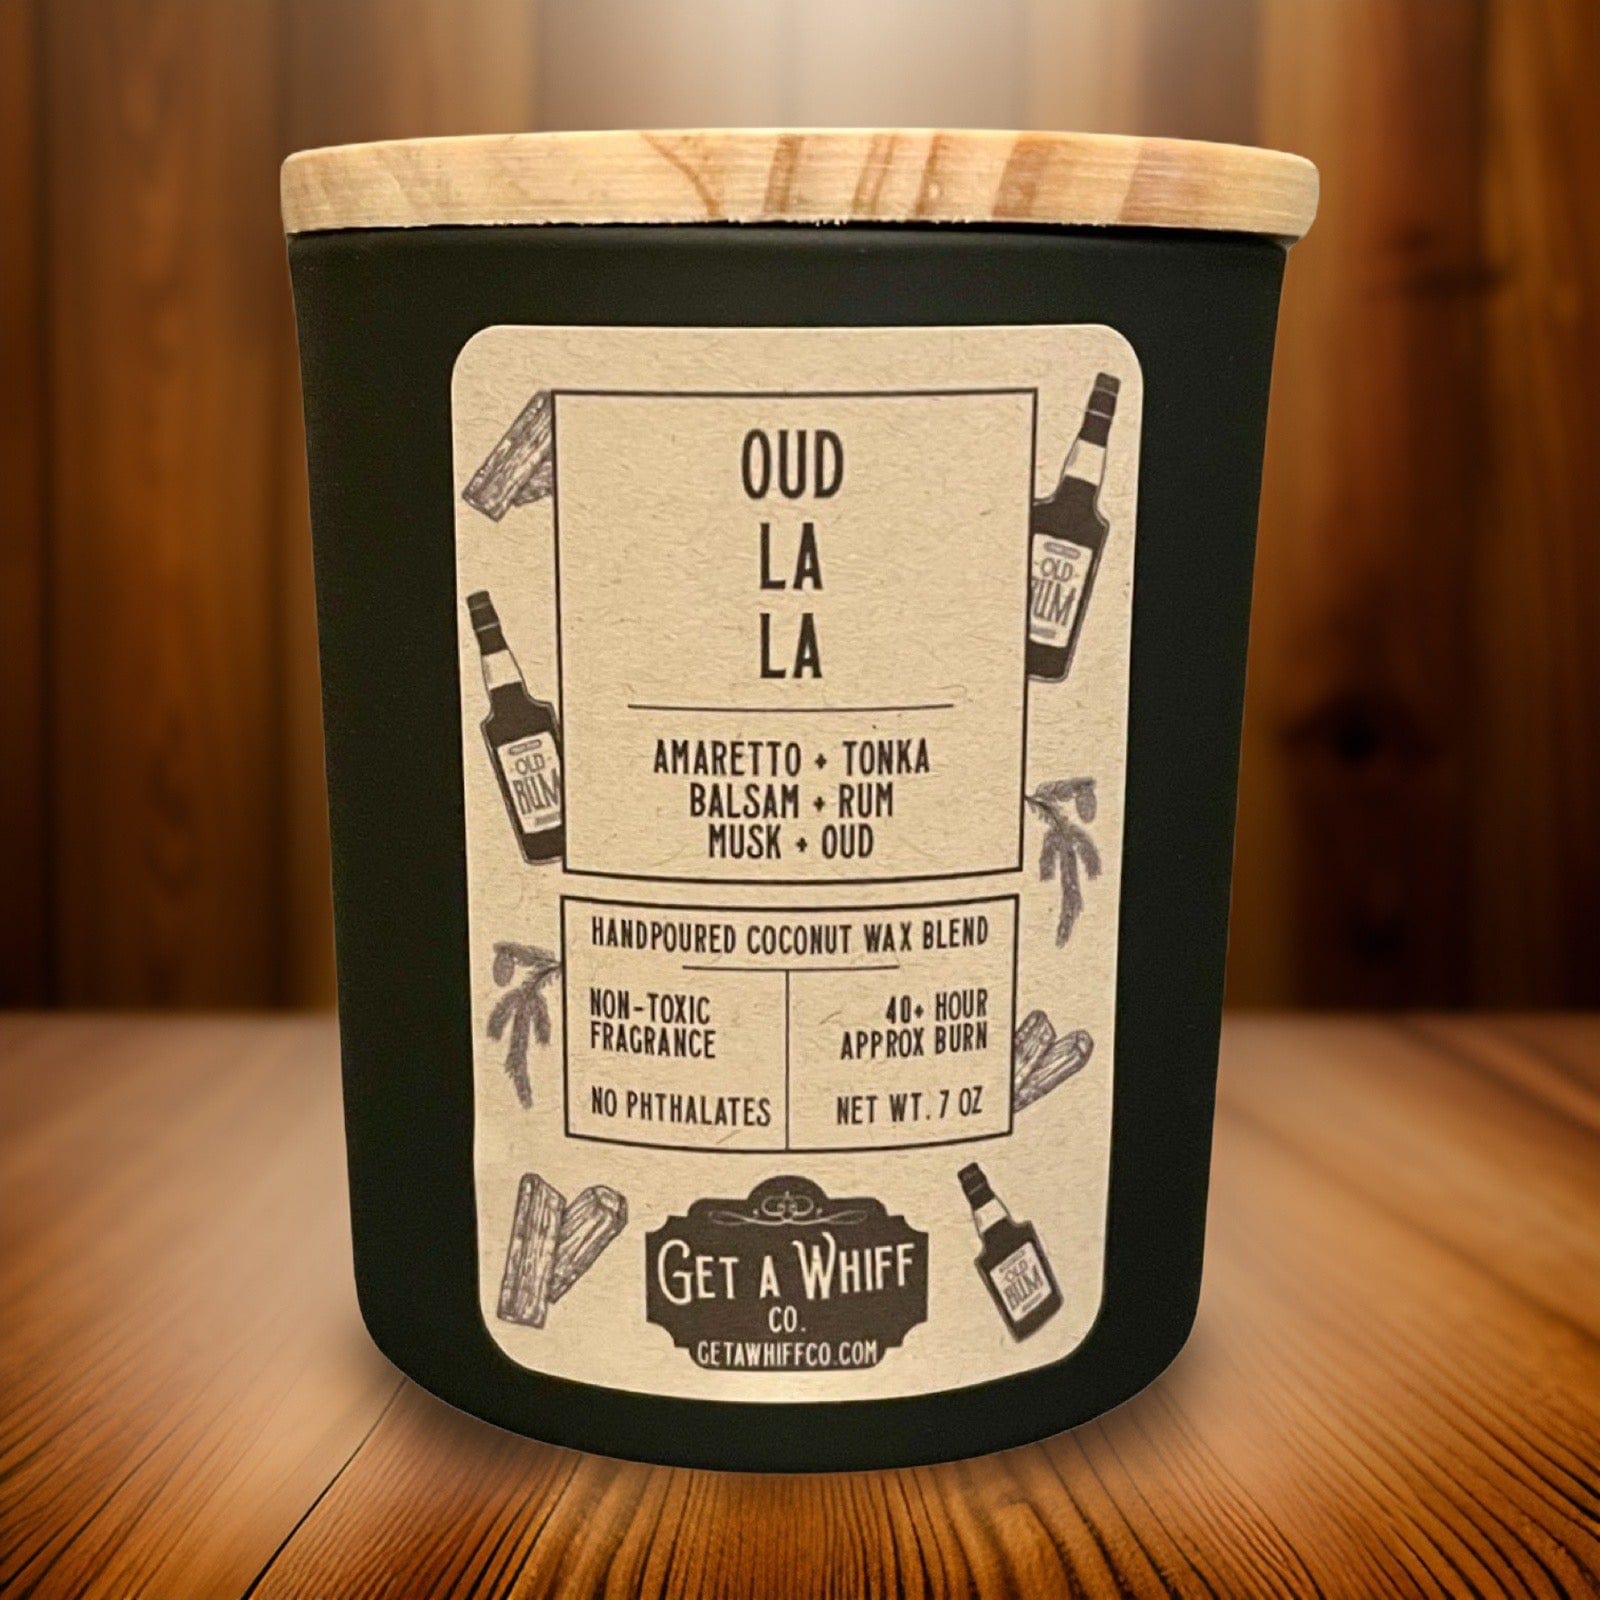 Teakwood & Oud Crackling Wooden Wick Scented Candle Made With Coconut Wax (Oud La La)